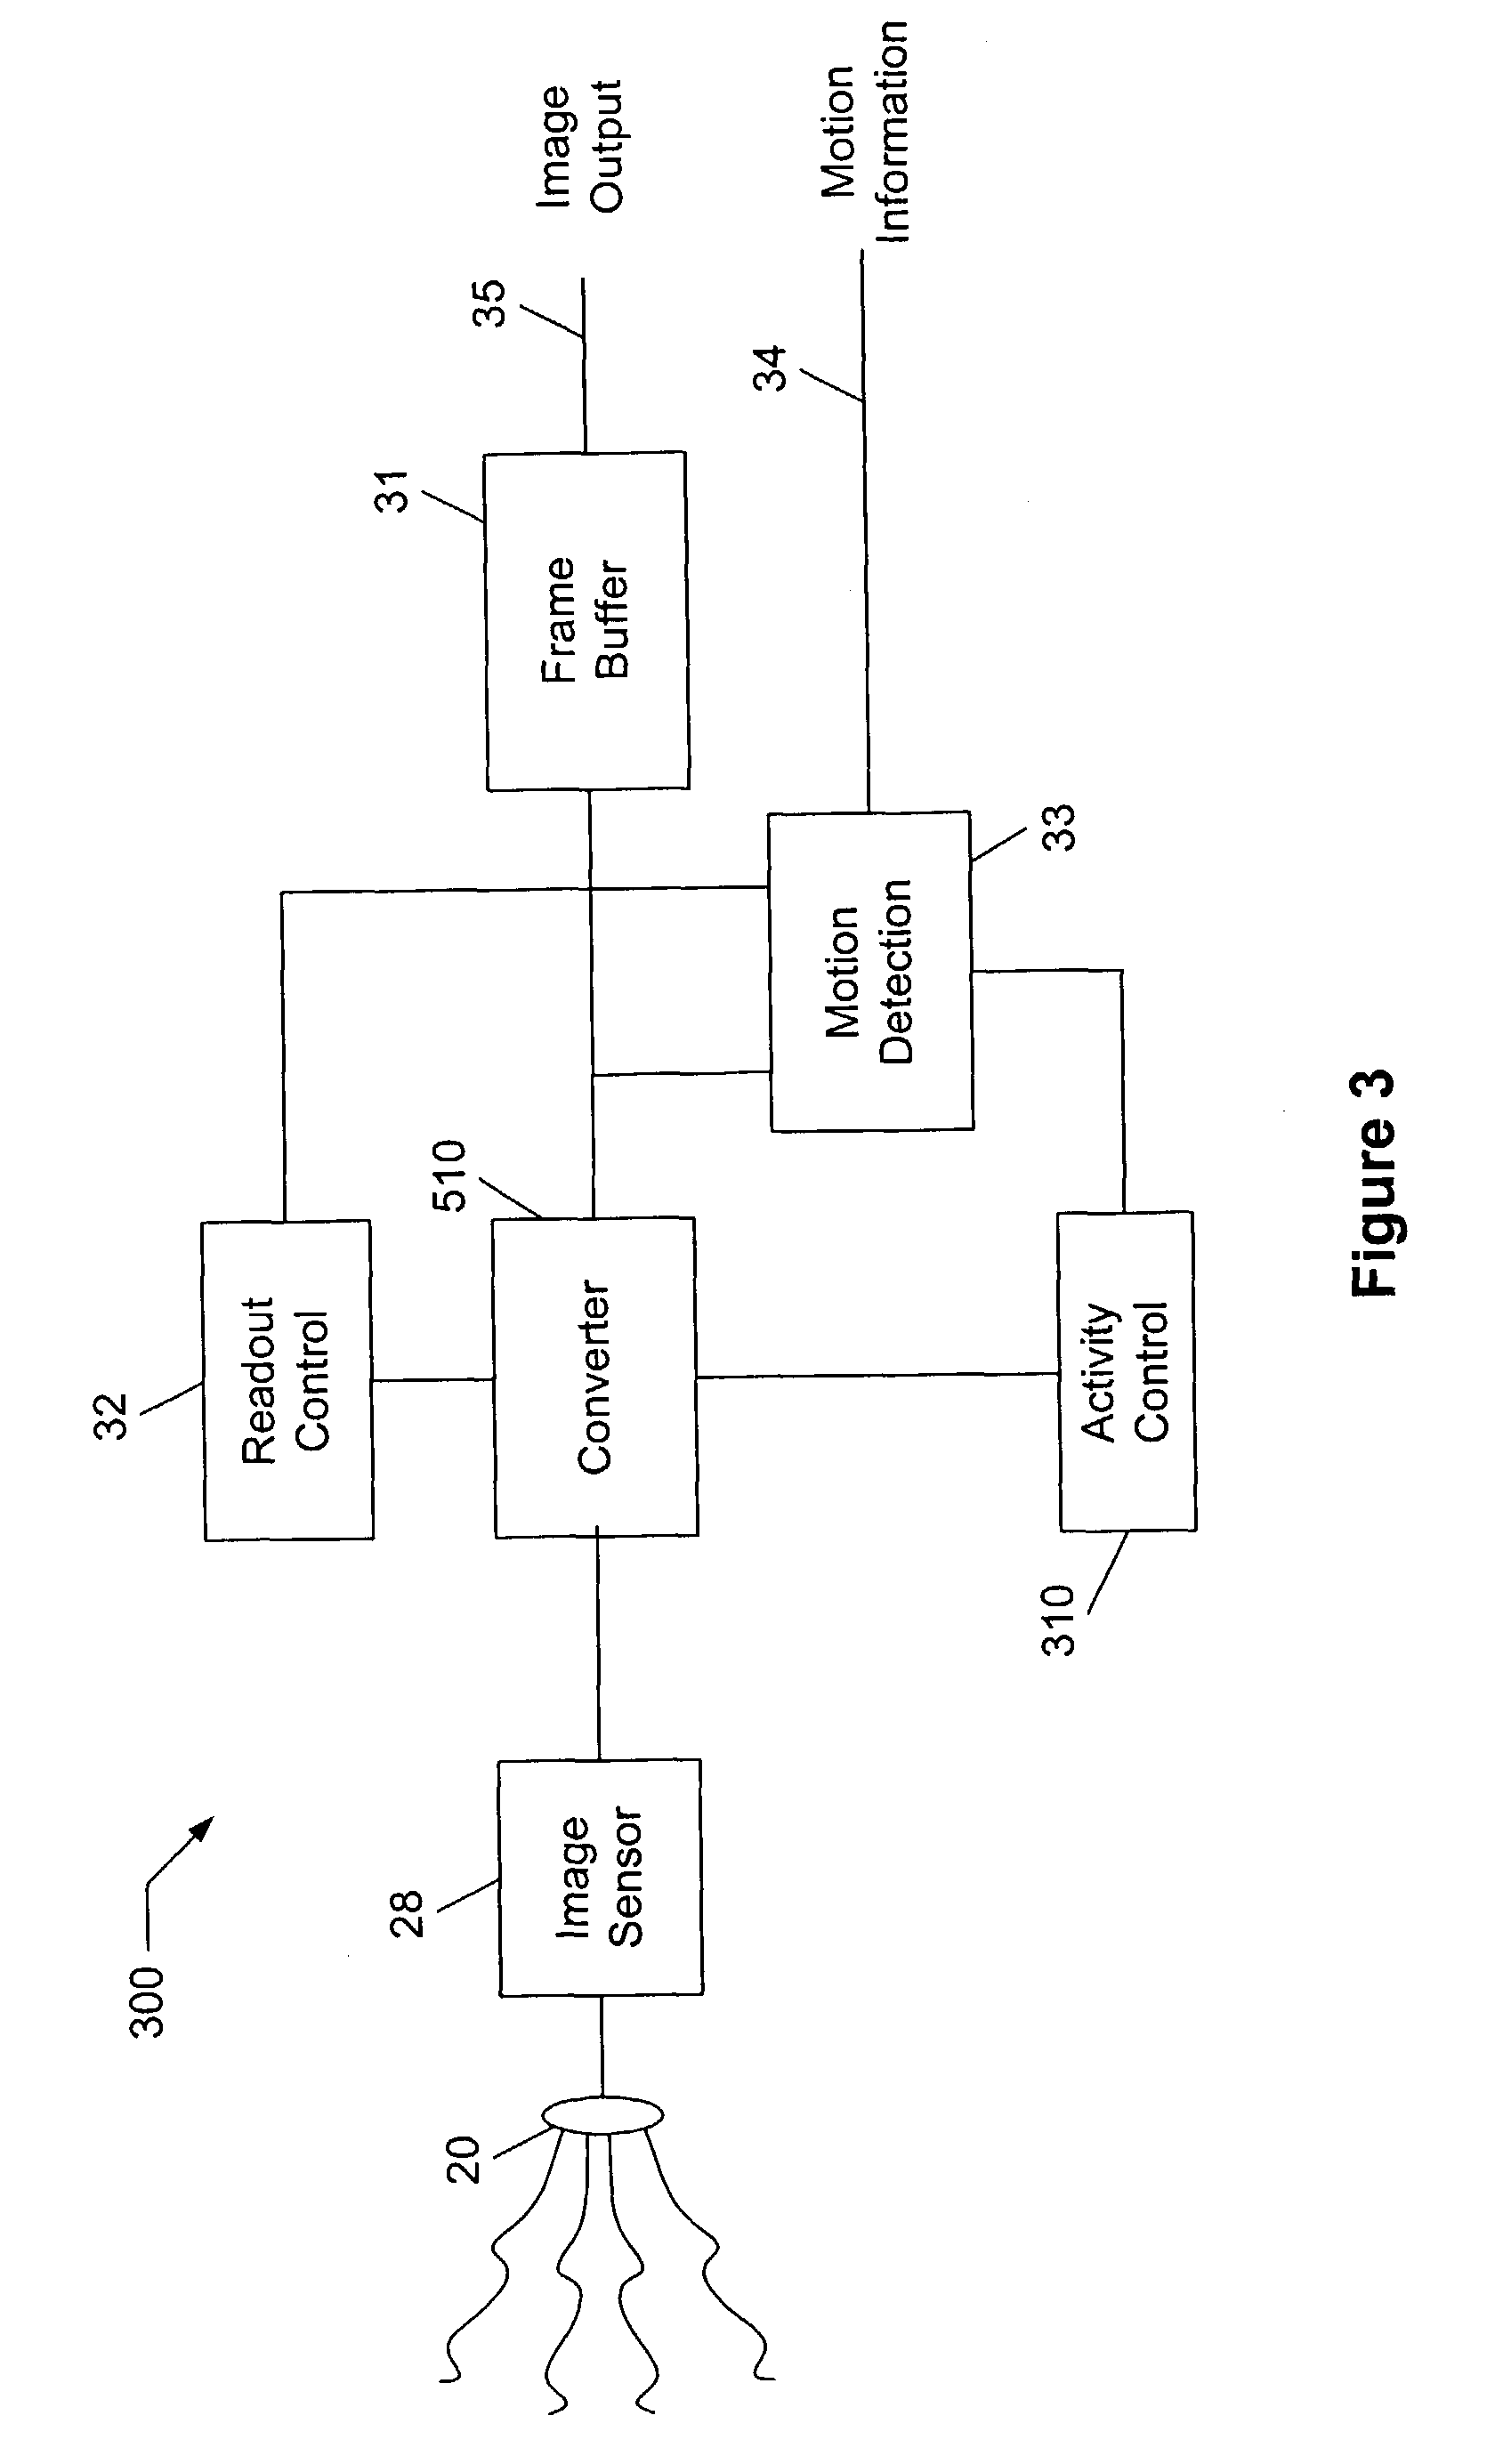 Systems and methods for utilizing activity detection information in relation to image processing